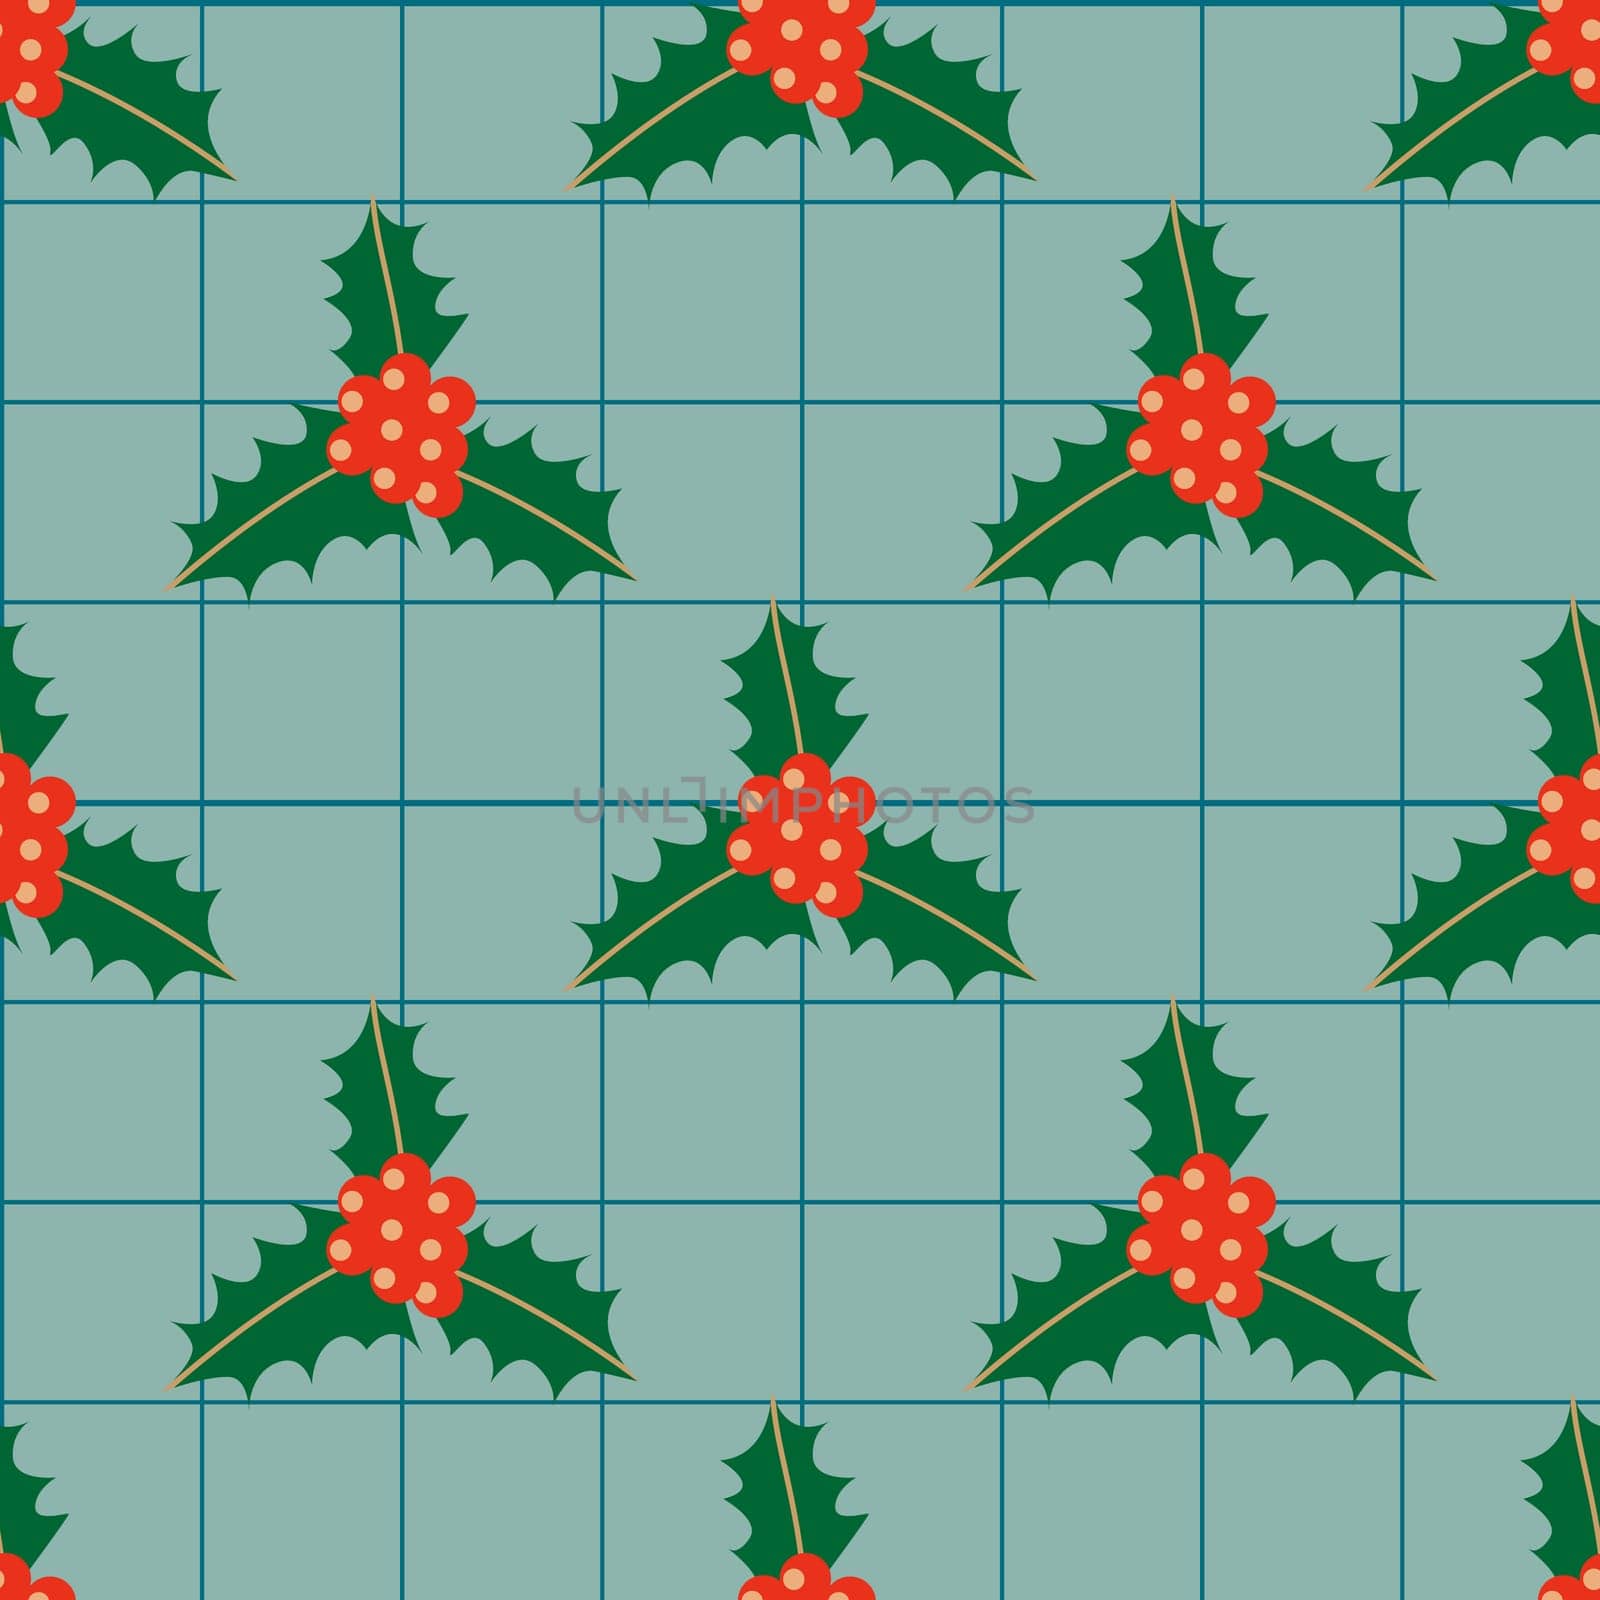 Retro Christmas pattern with holly leaves and berries. Holly seamless pattern